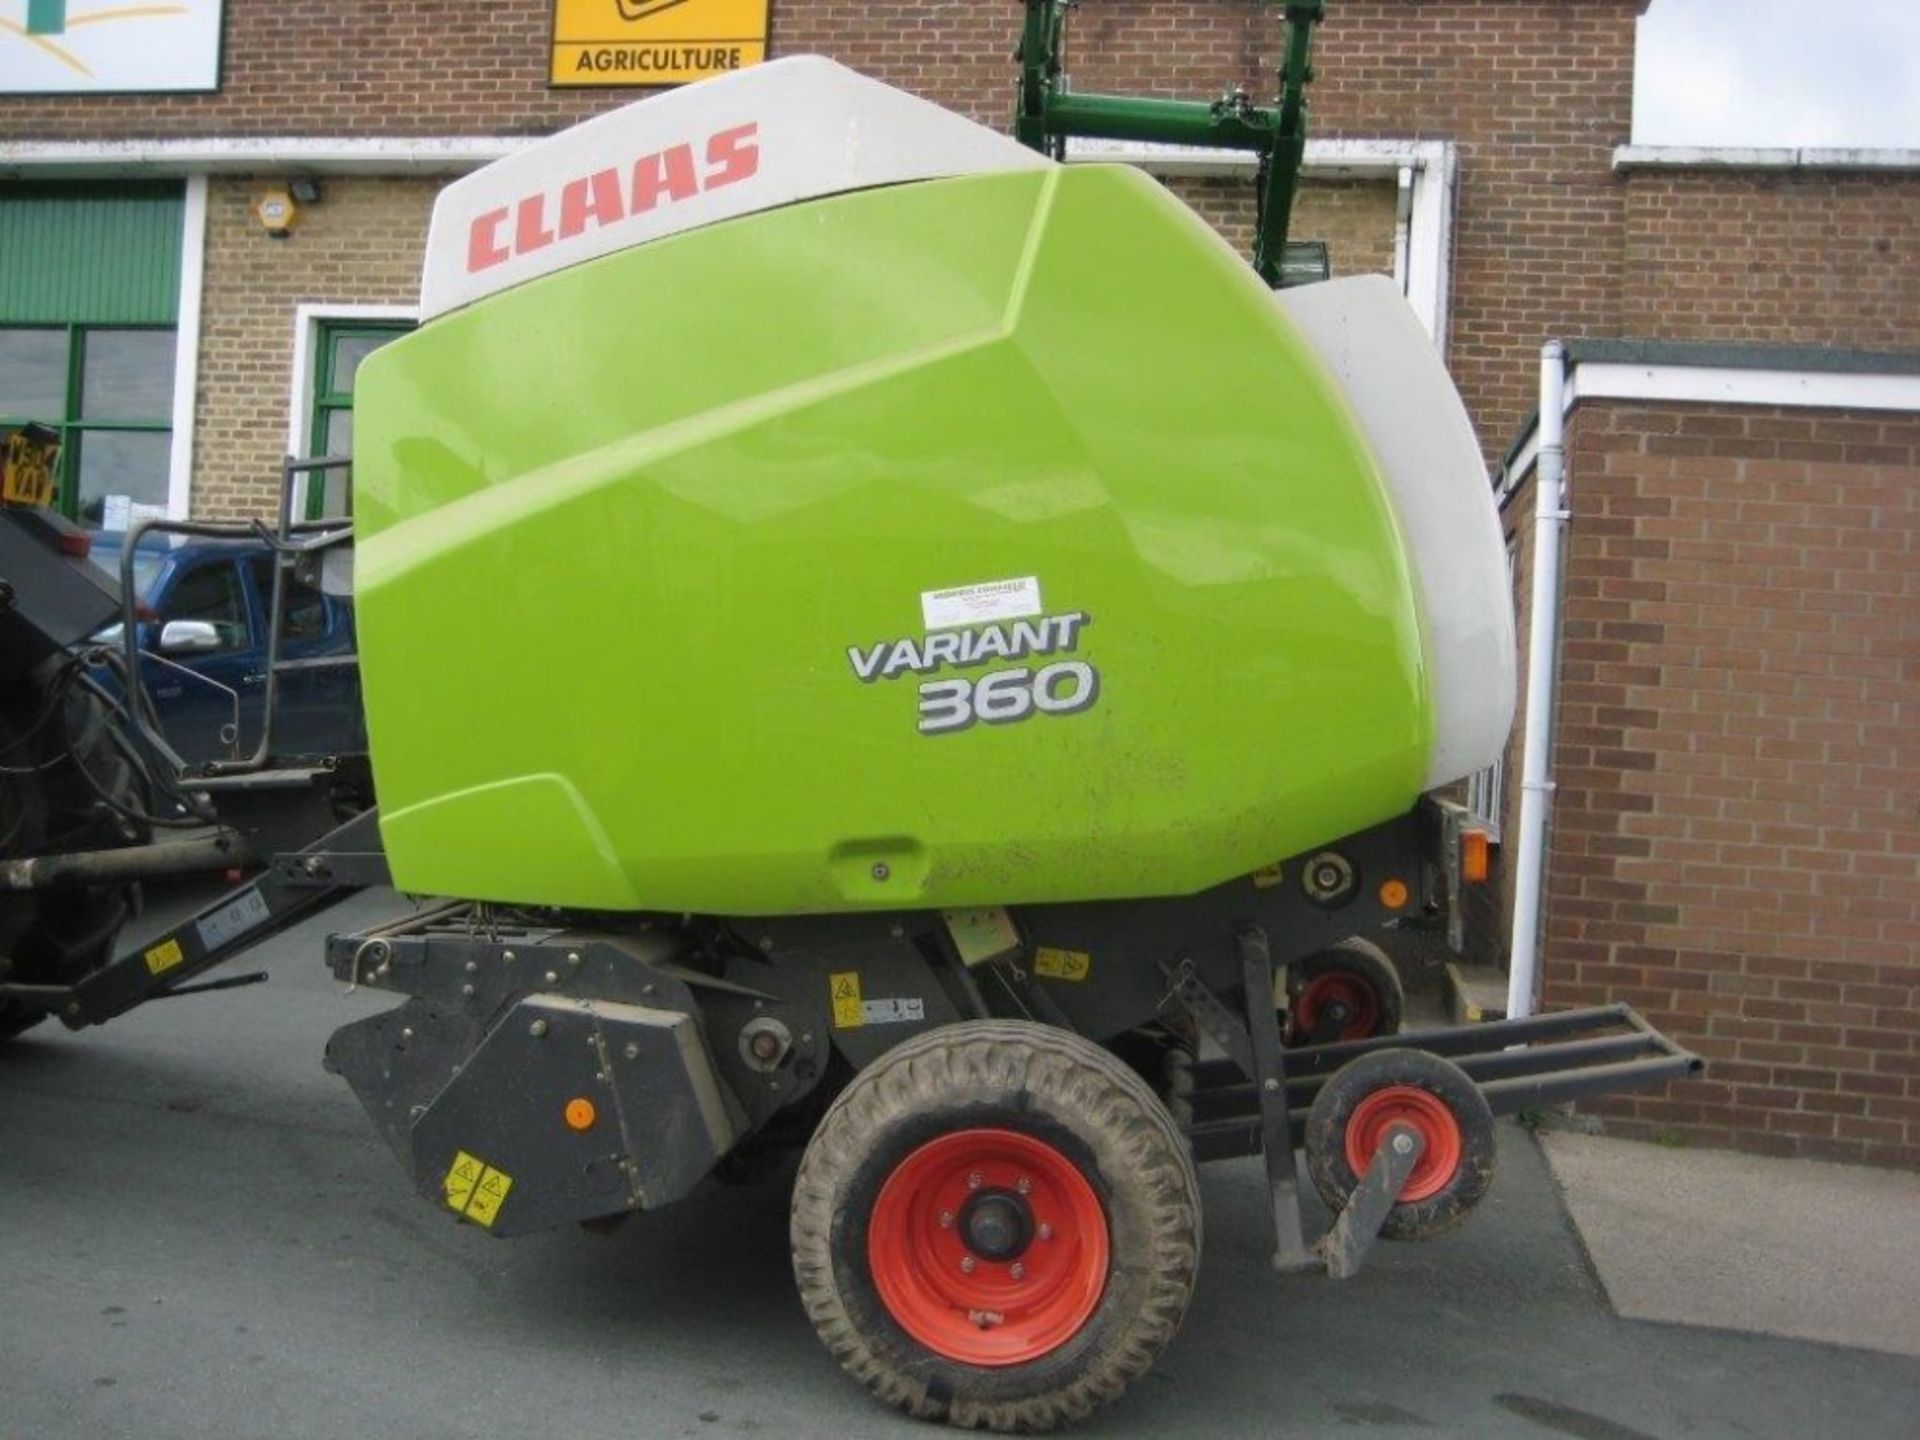 2007 Claas Variant 360 Round Baler with Rotor Feeder.  Bale count: Approx 12,000 bales.  Ser.No.